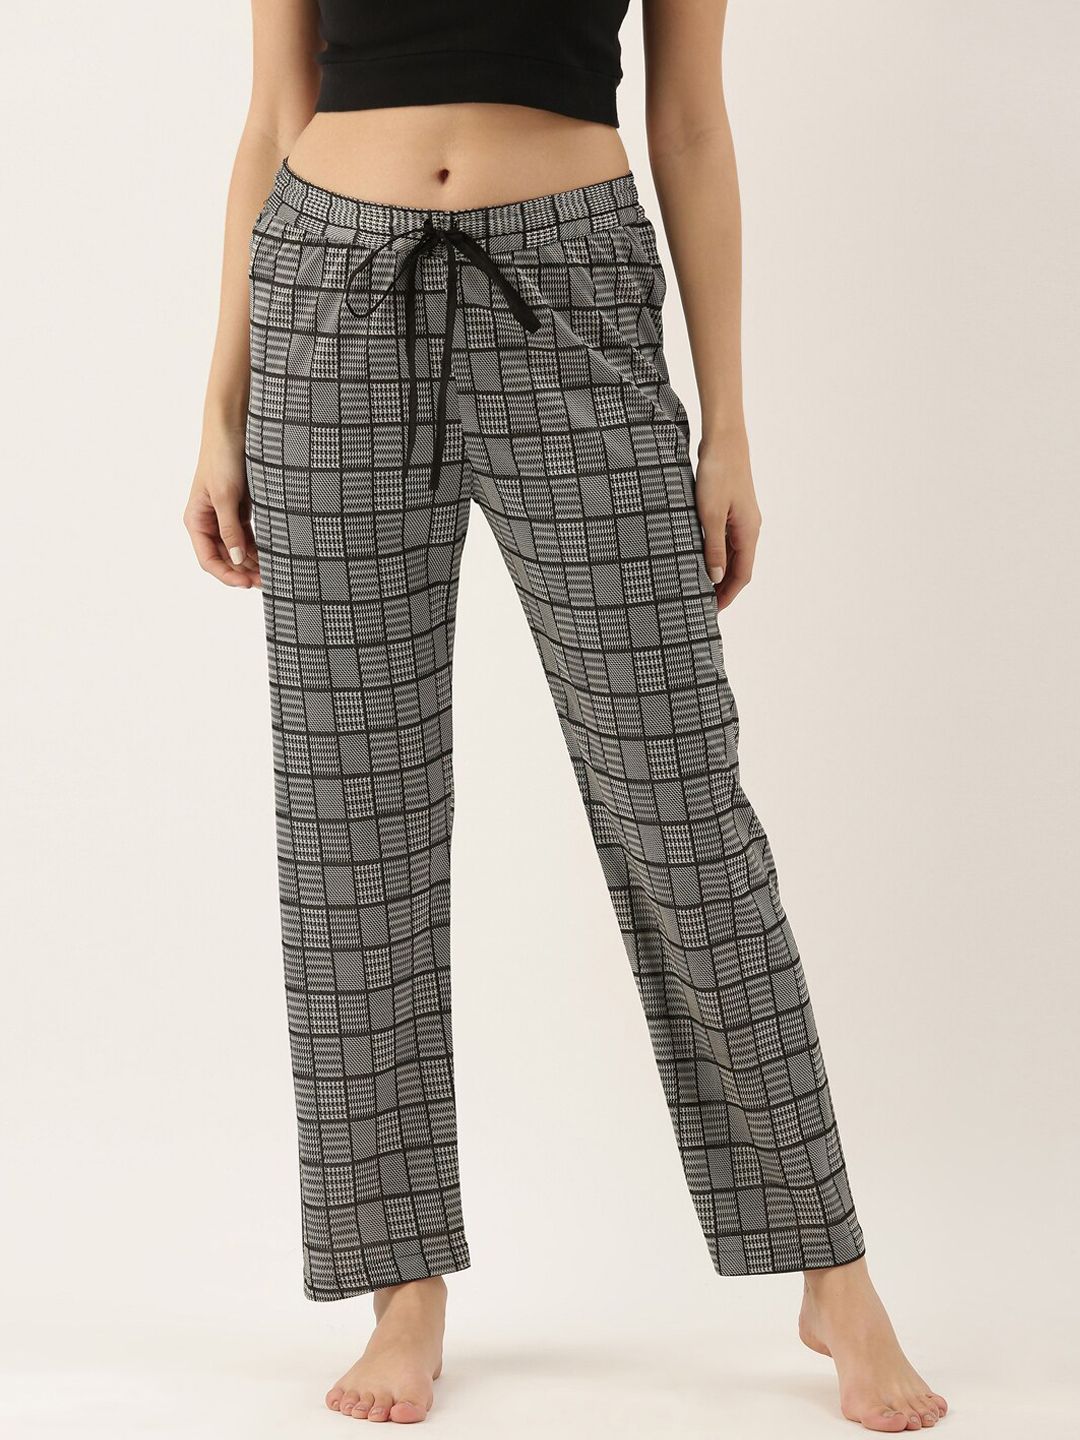 Bannos Swagger Women Black Checkered Lounge Pants Price in India